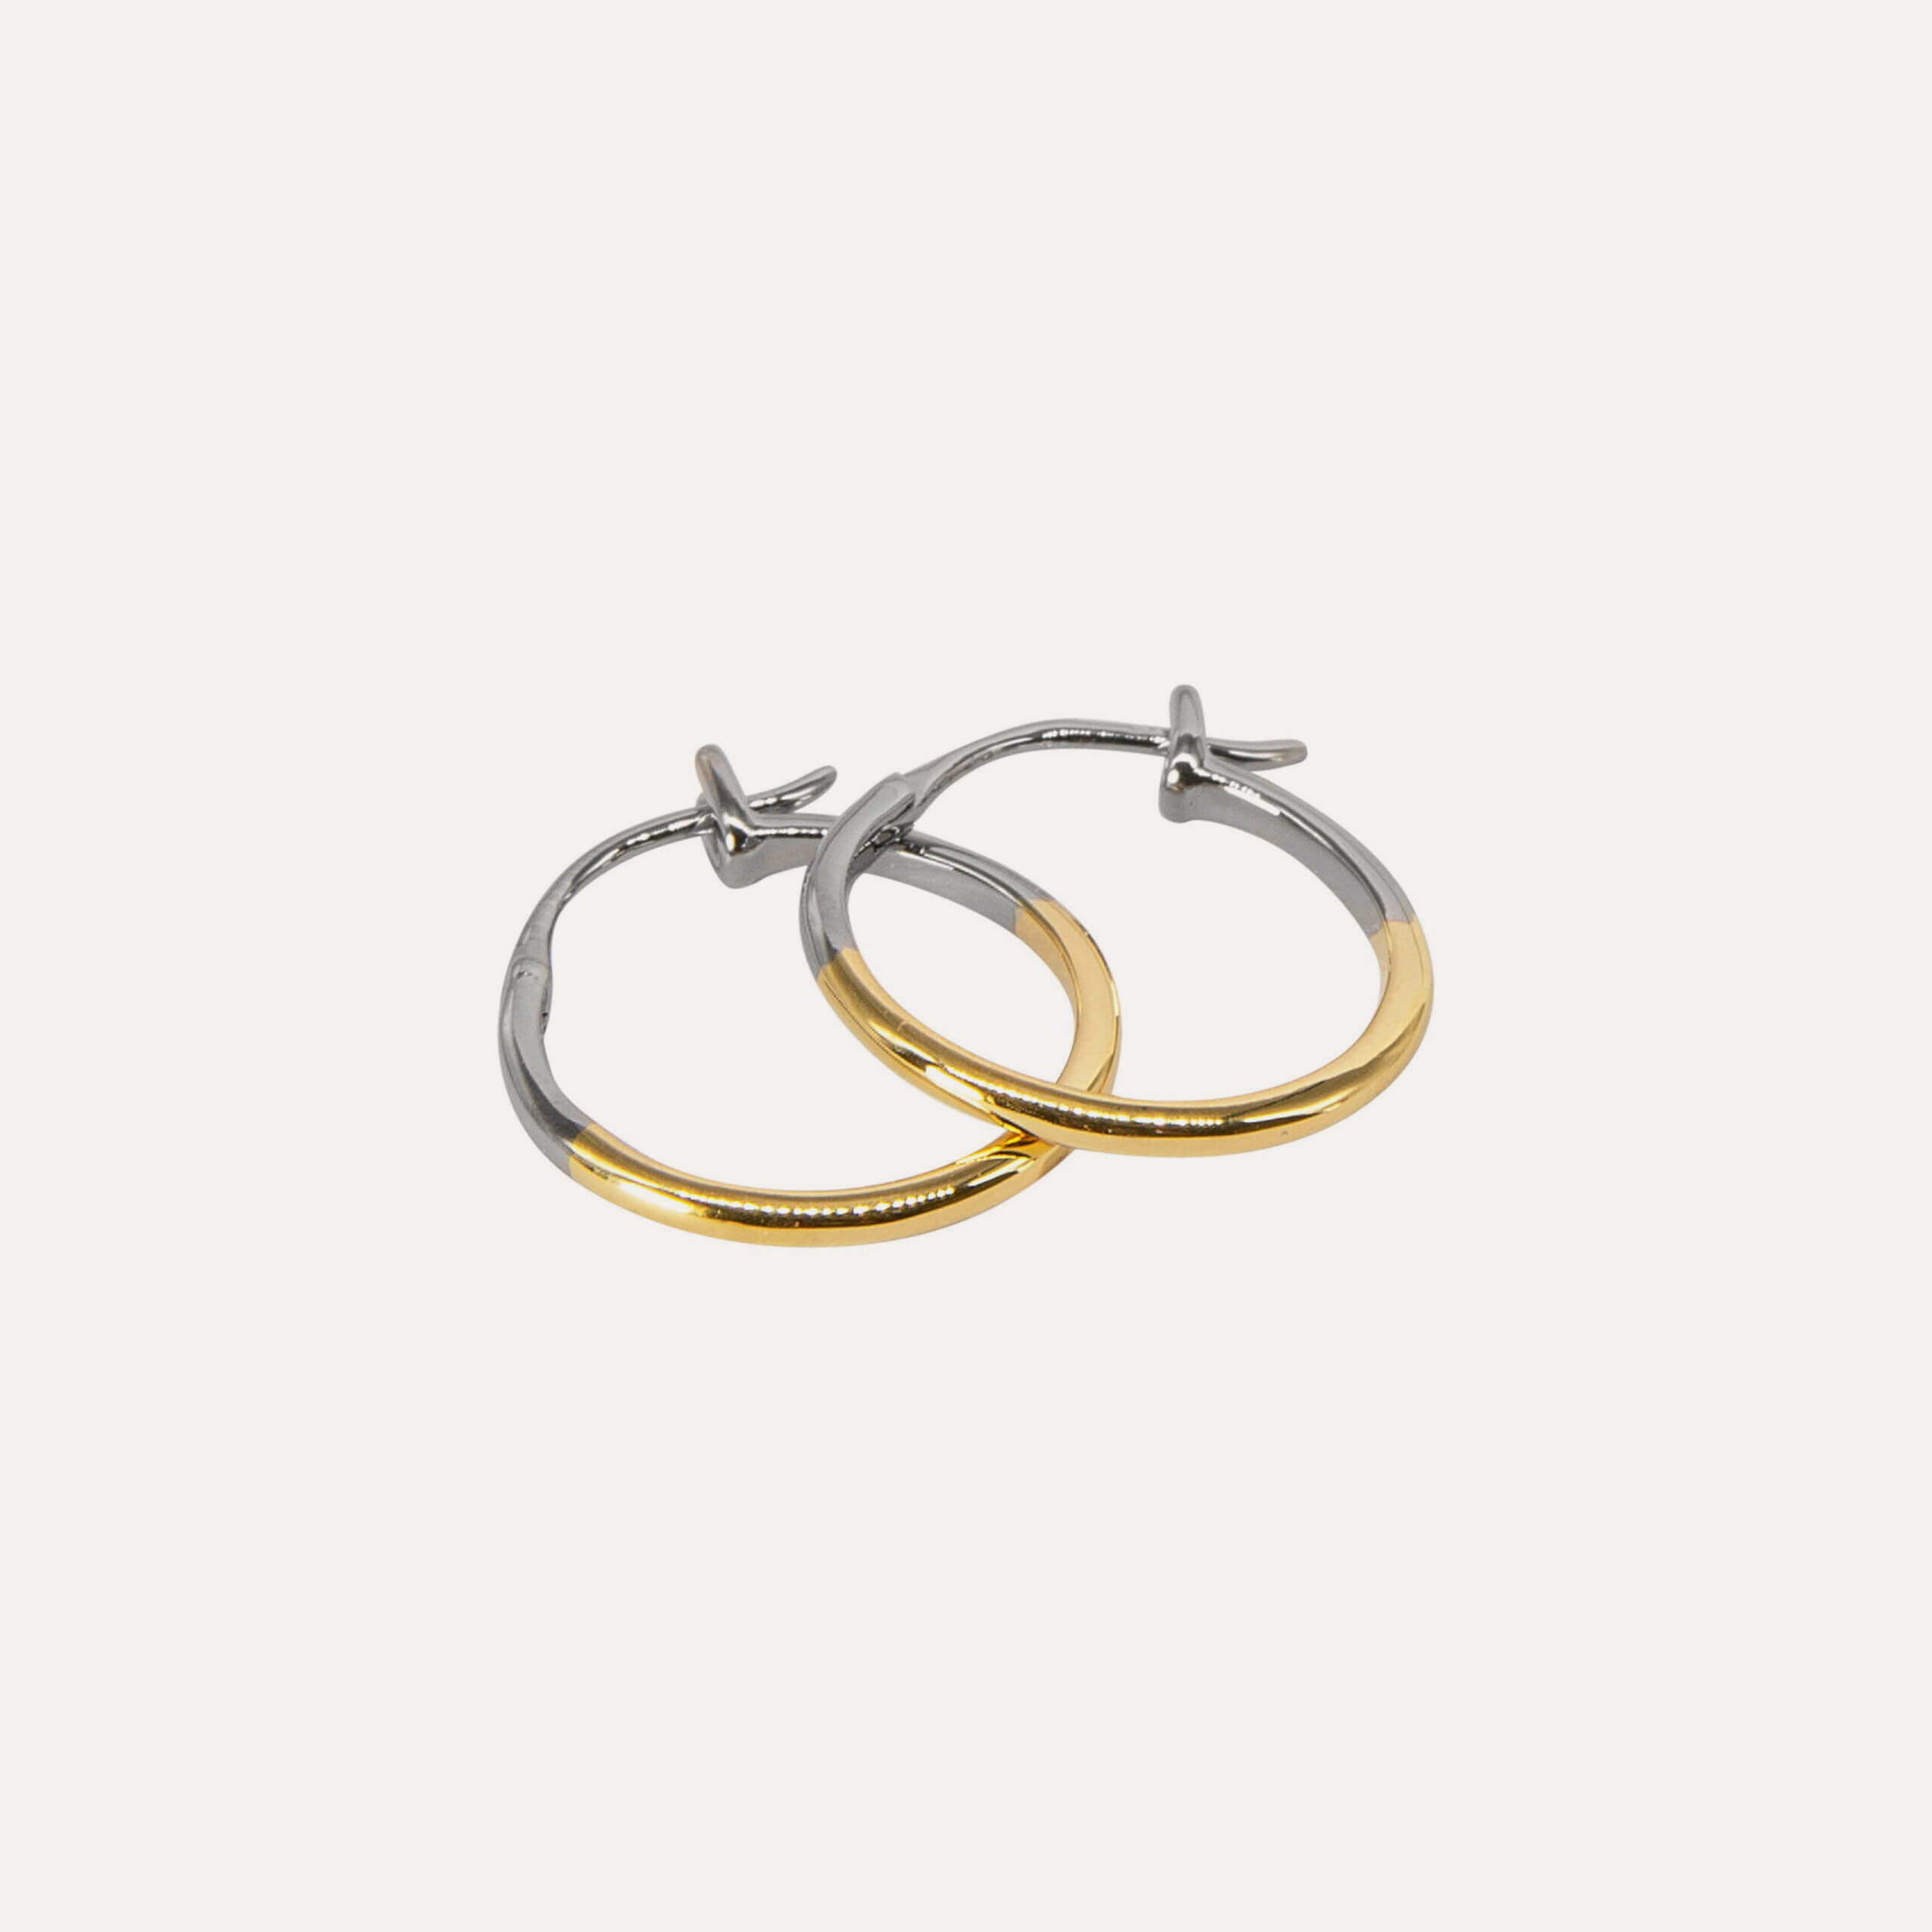 Jewel Tree London is a sustainable jewellery and ethical jewellery brand